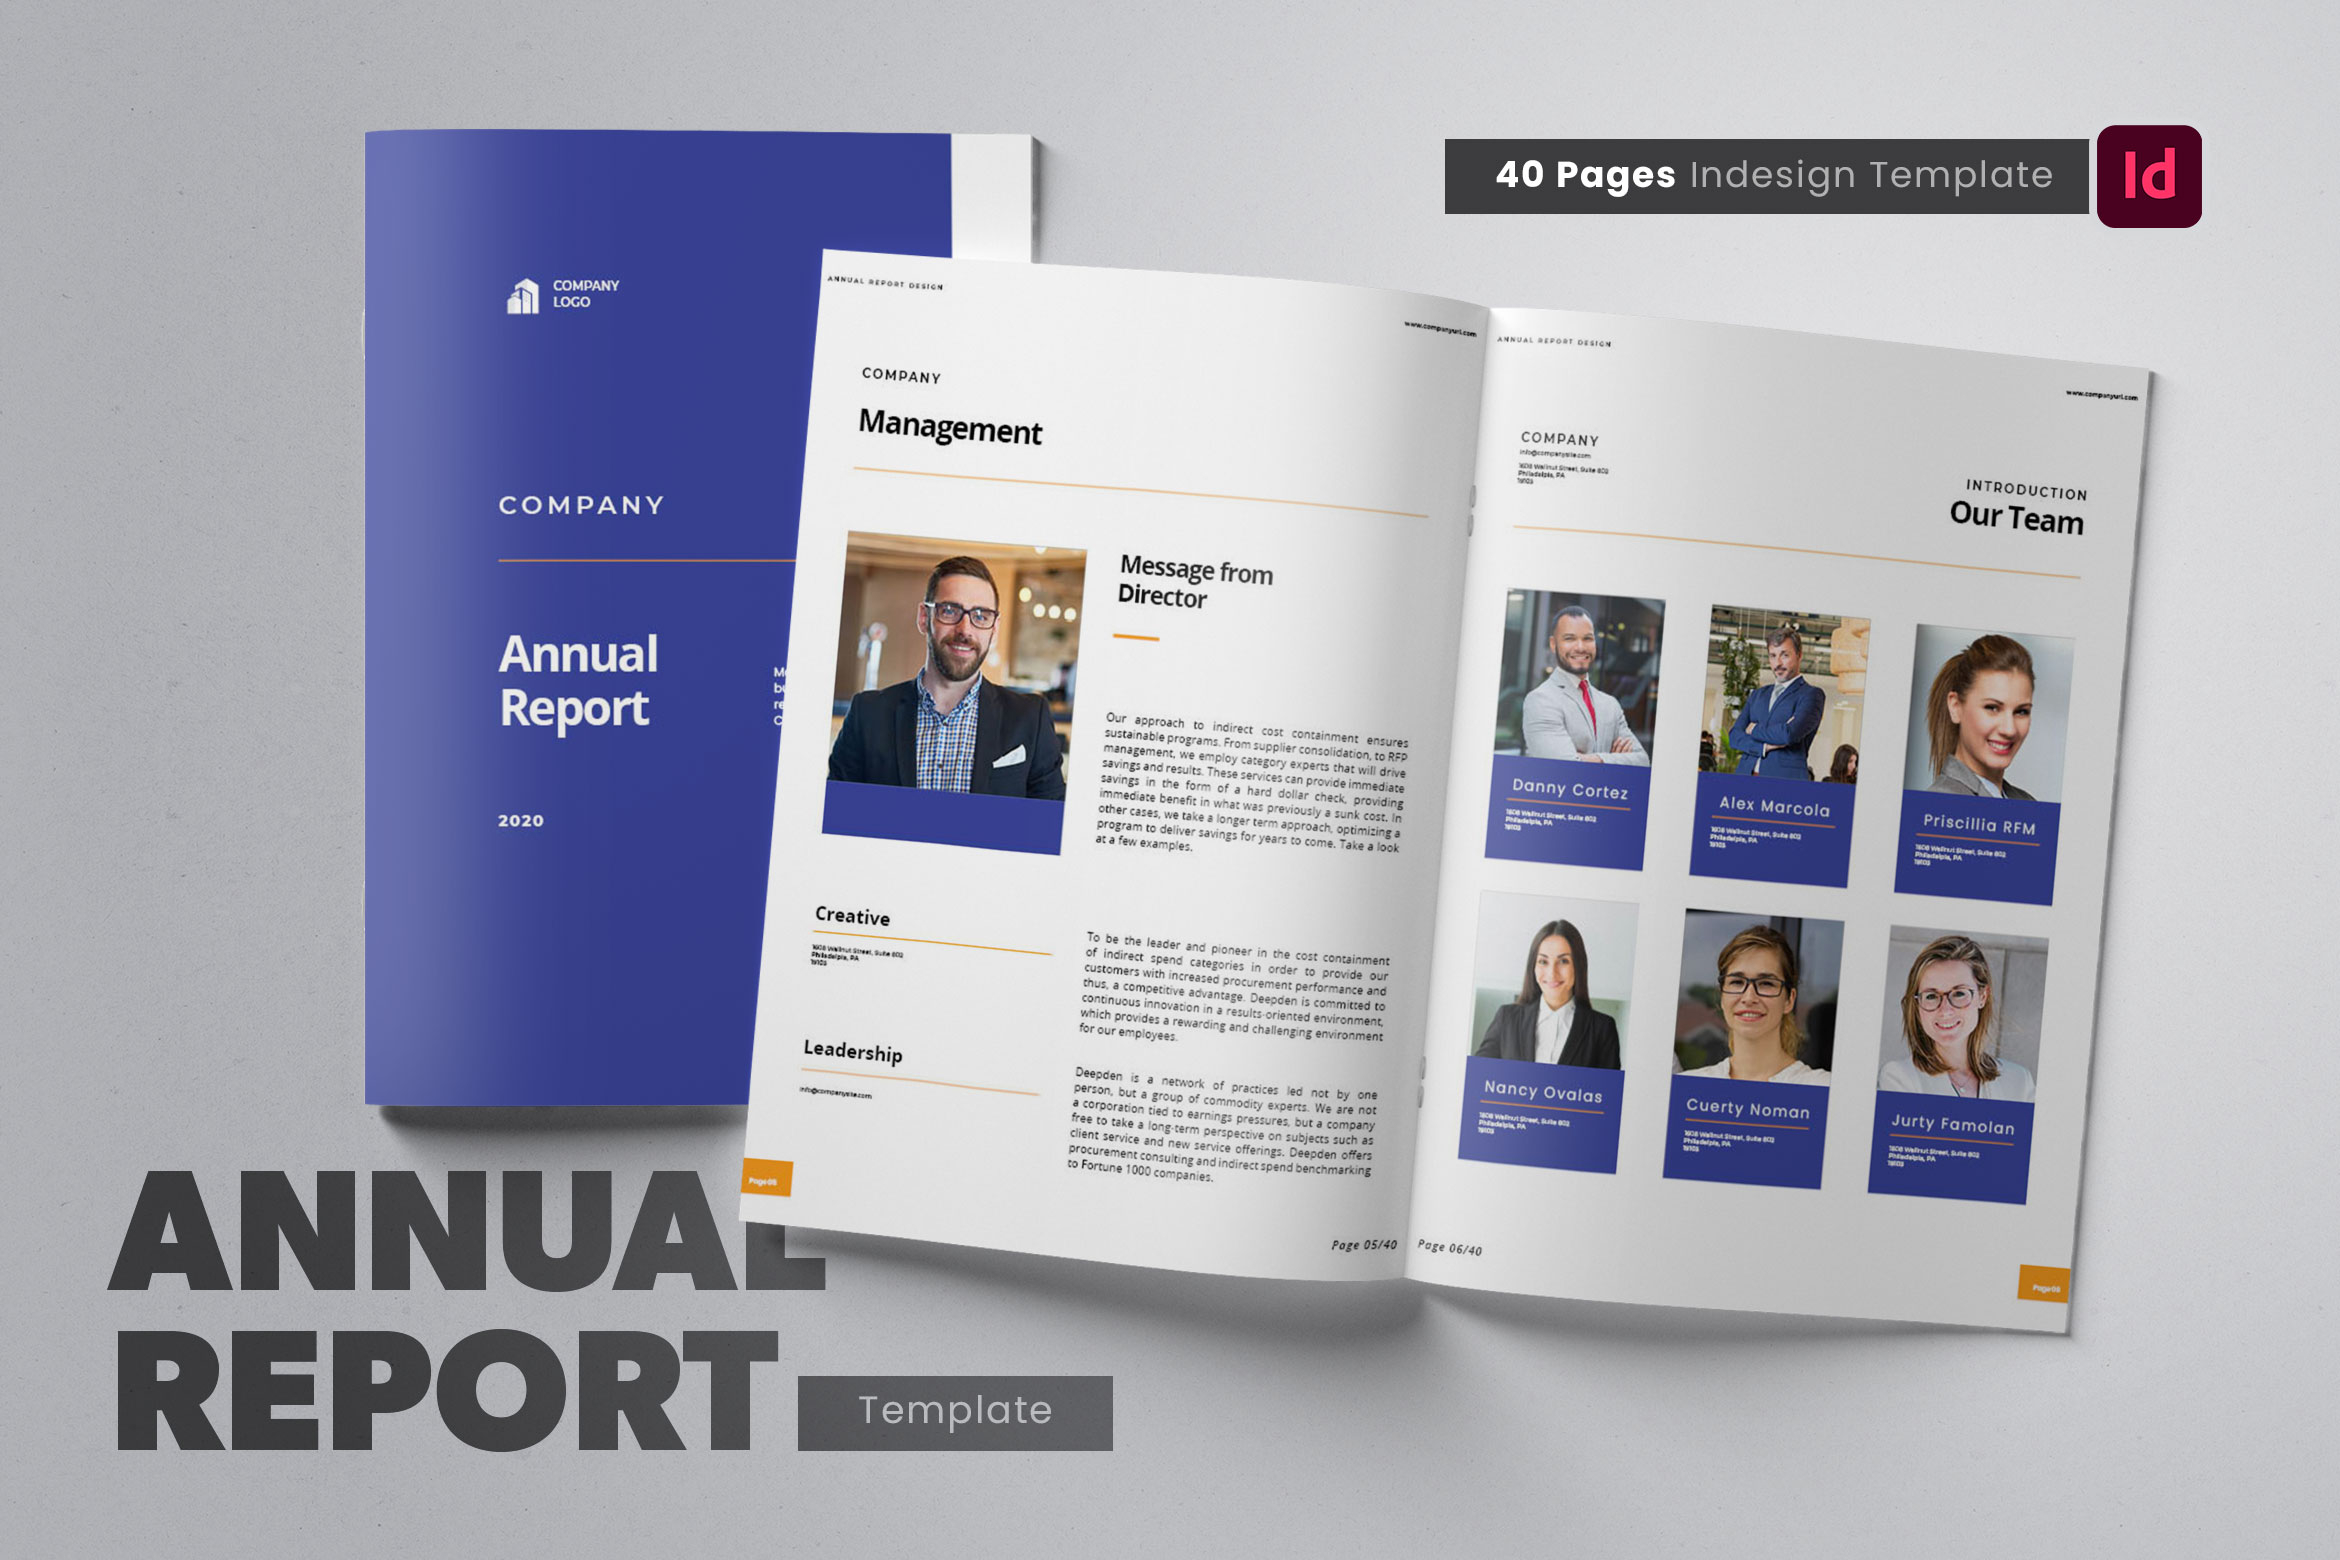 Company Annual Report Indesign Template Intended For Ind Annual Report Template